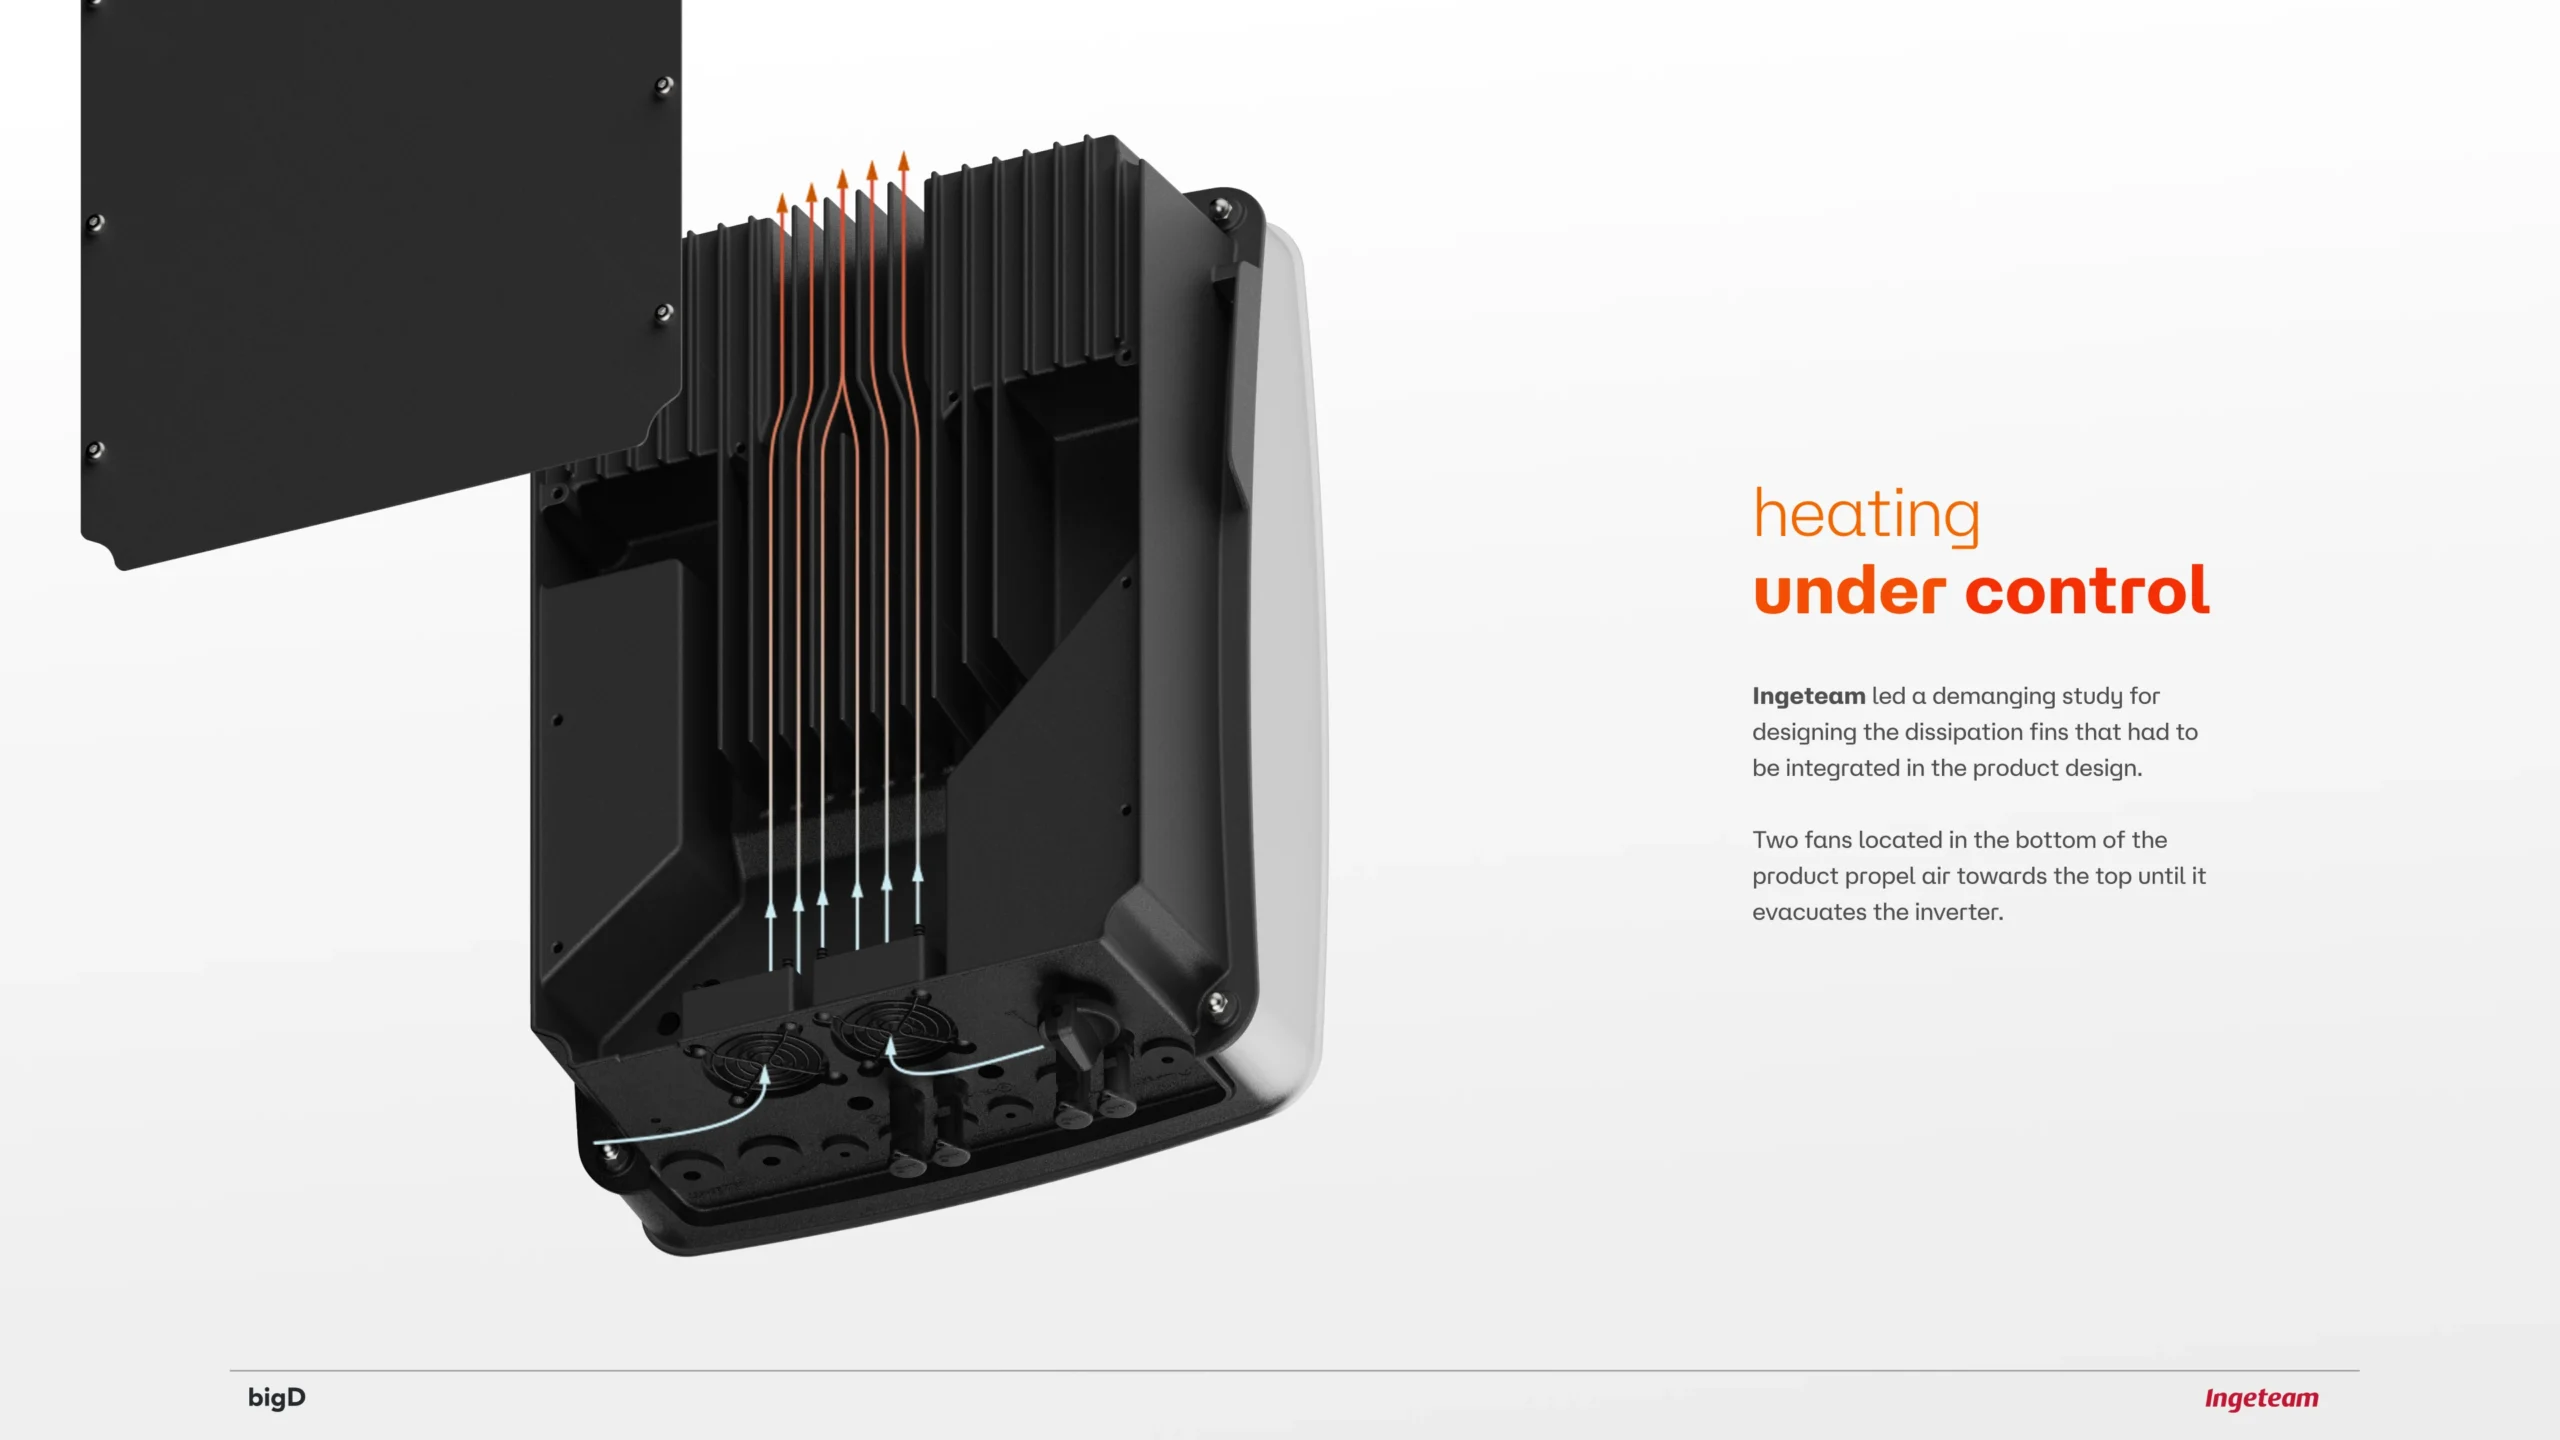 Ingeteam led a demanging study for designing the dissipation fins that had to be integrated in the product design.

Two fans located in the bottom of the product propel air towards the top until it evacuates the inverter.